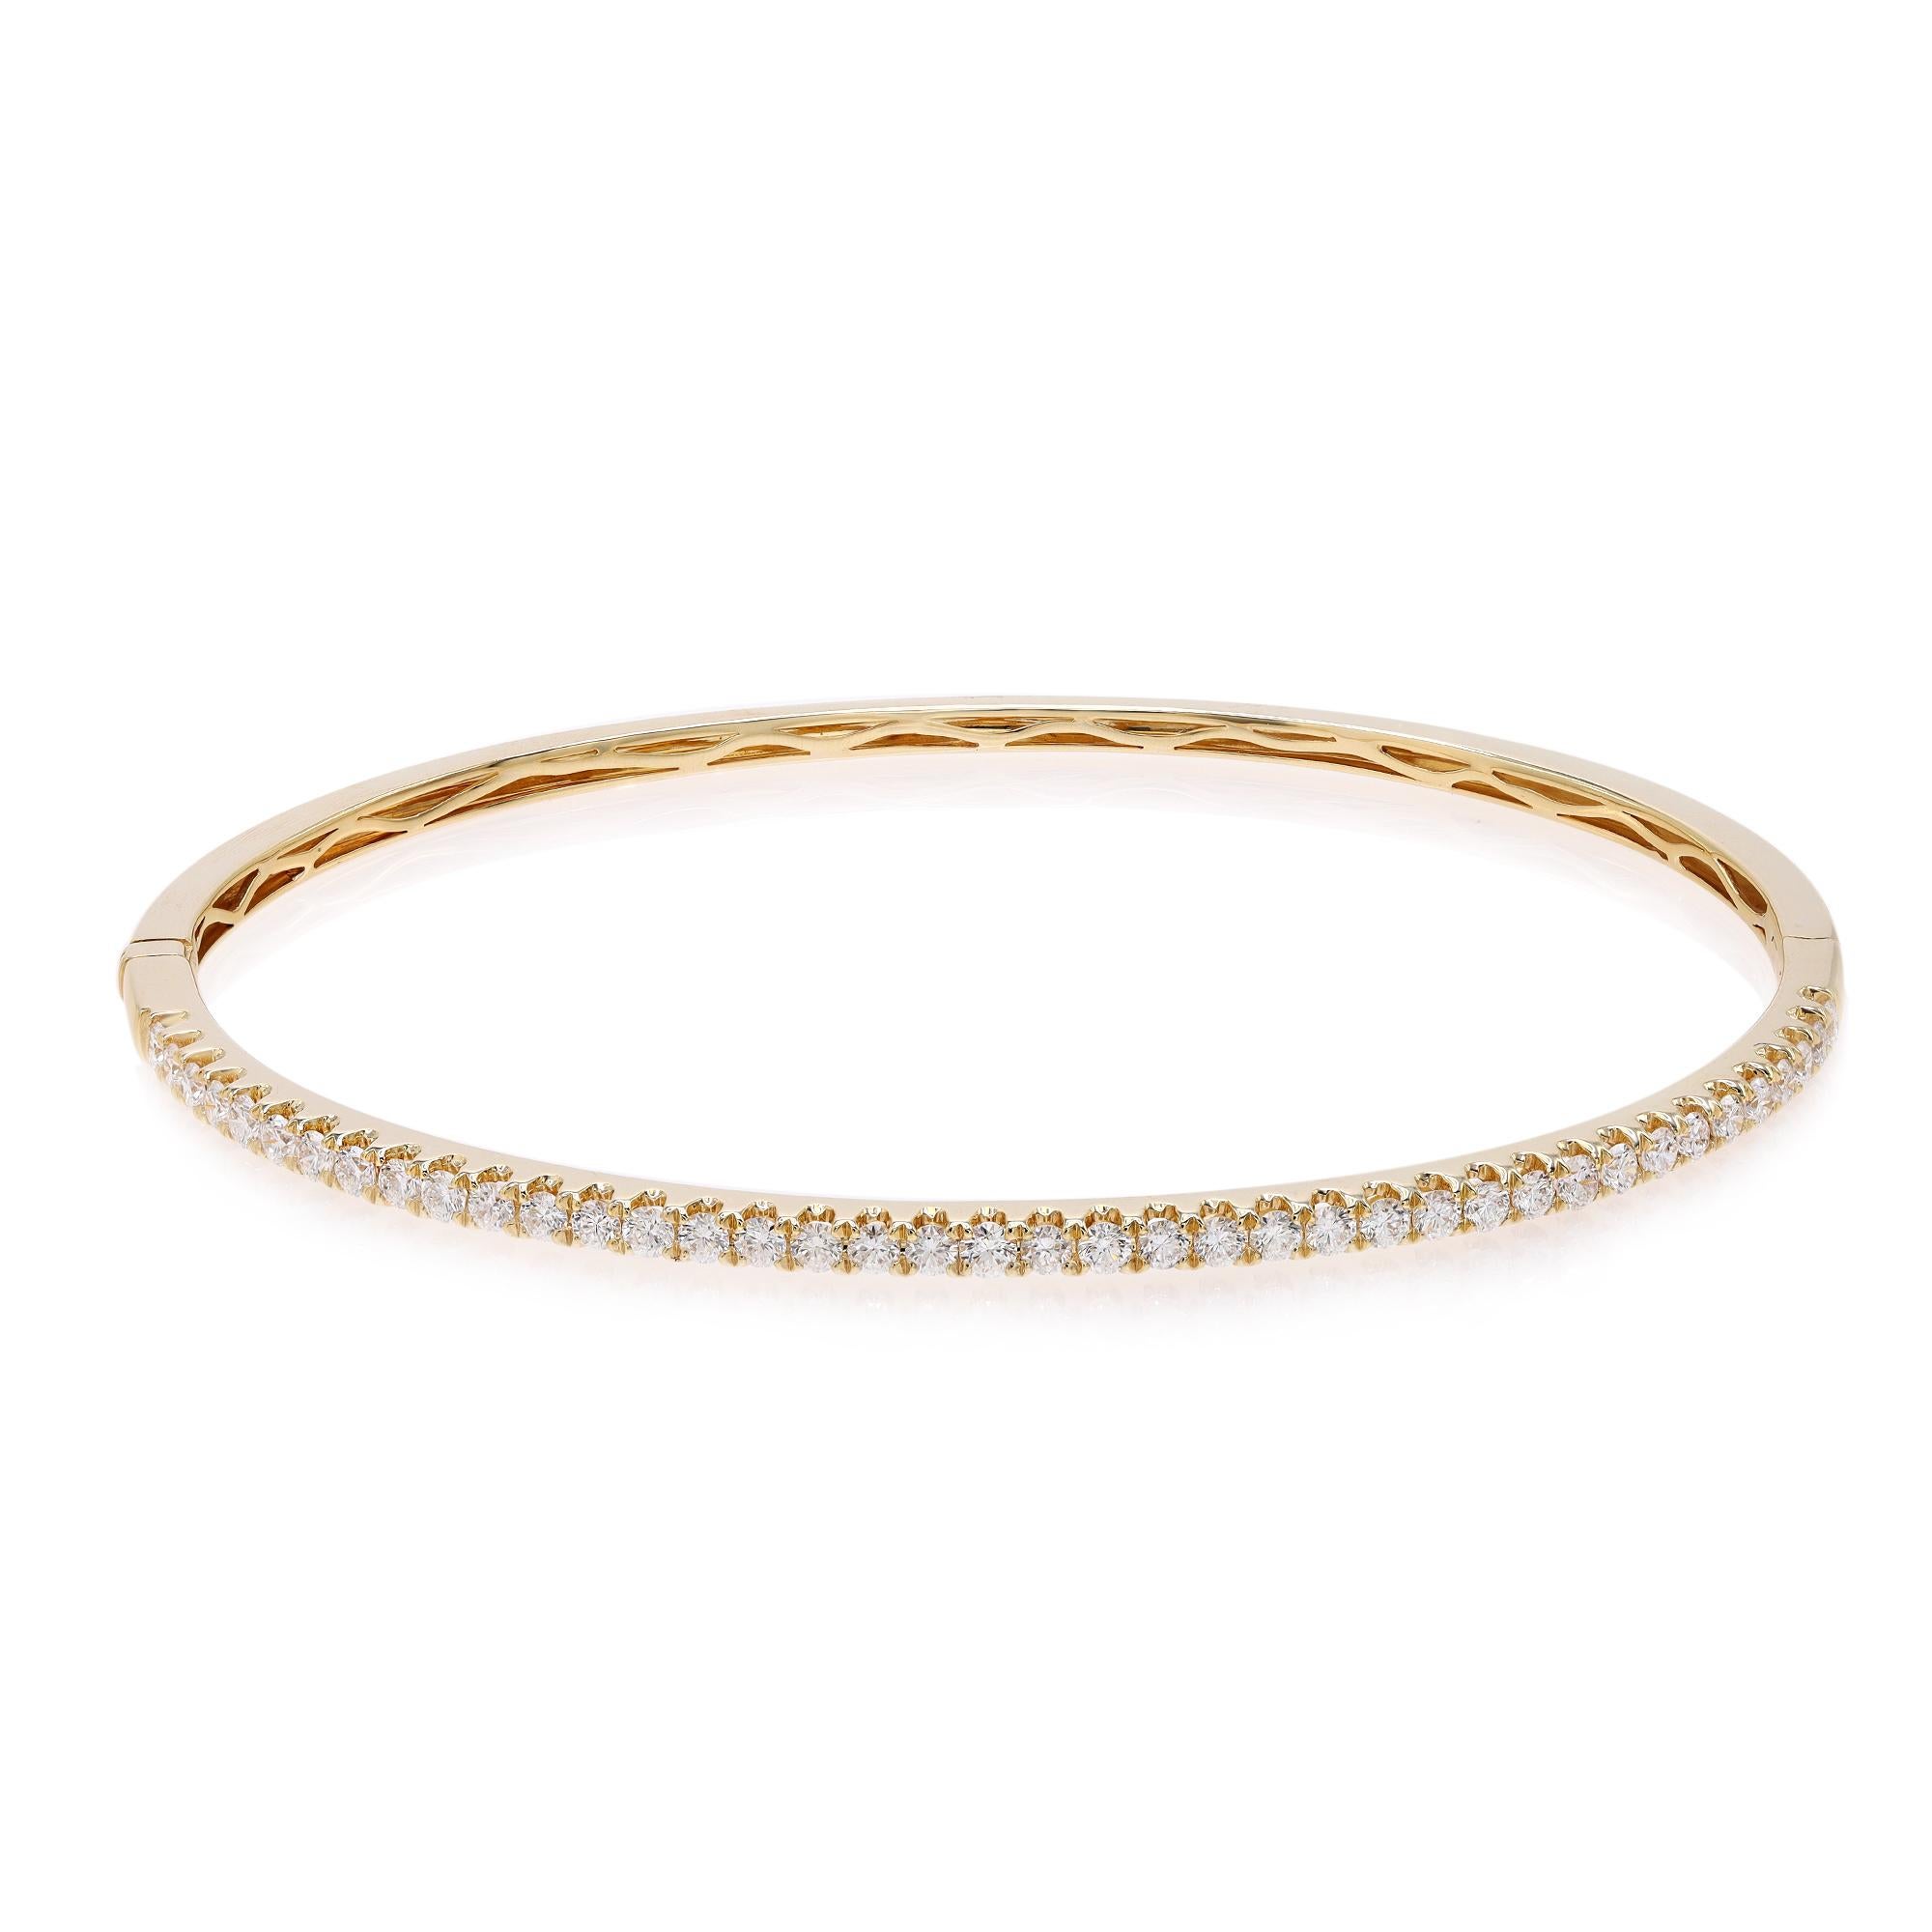 Rachel Koen Round Cut Diamond Bangle Bracelet 18K Yellow Gold 1.00Cttw In New Condition For Sale In New York, NY